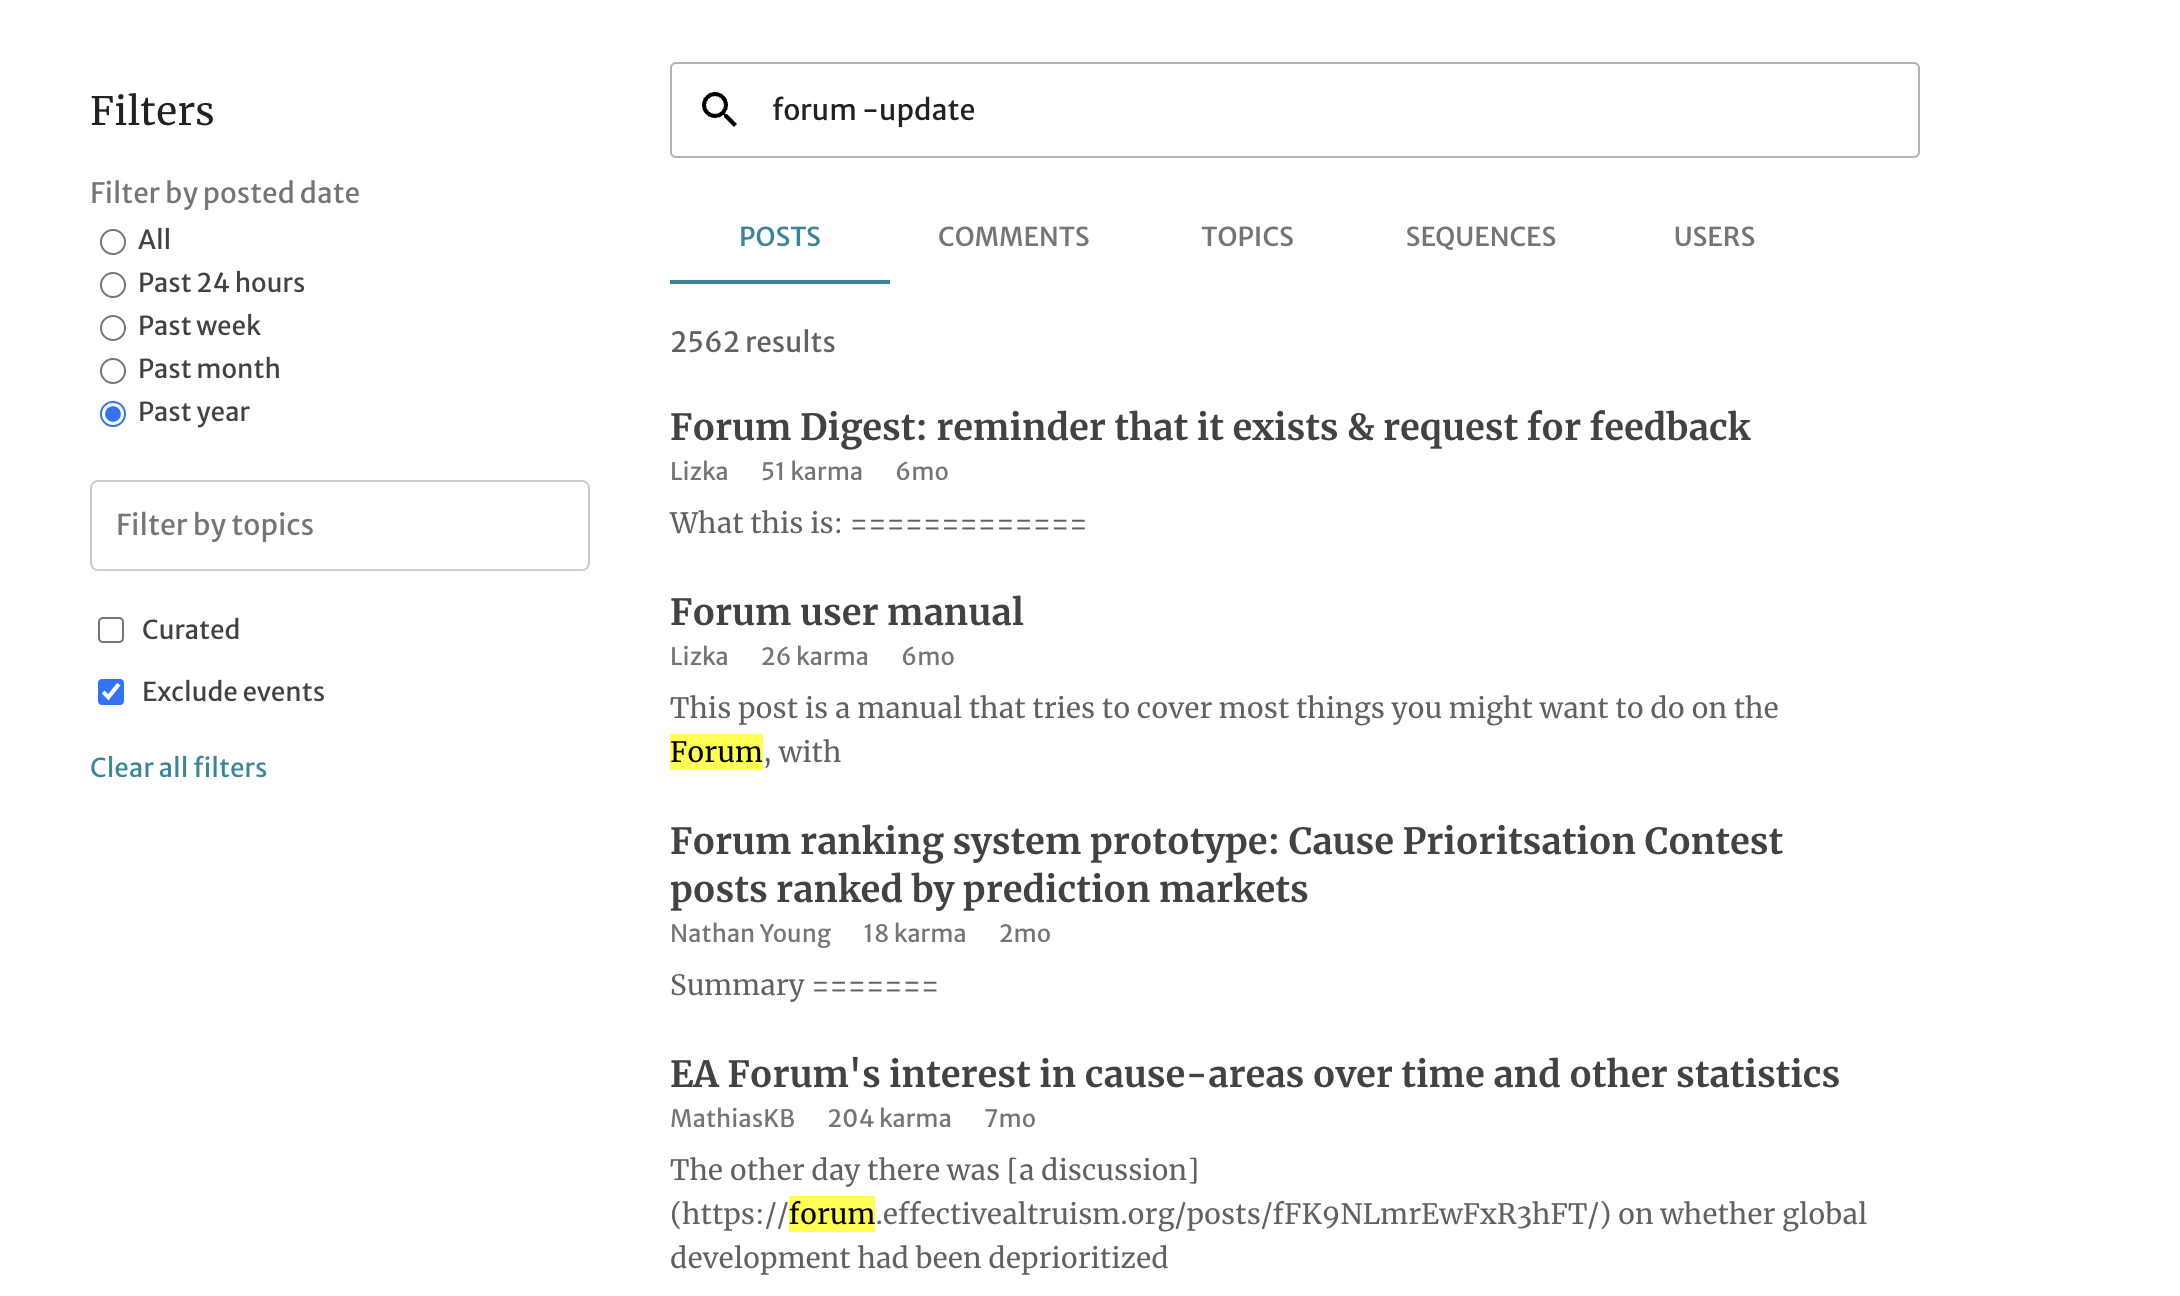 Roblox needs to take away tags for searching users - Forum Features -  Developer Forum